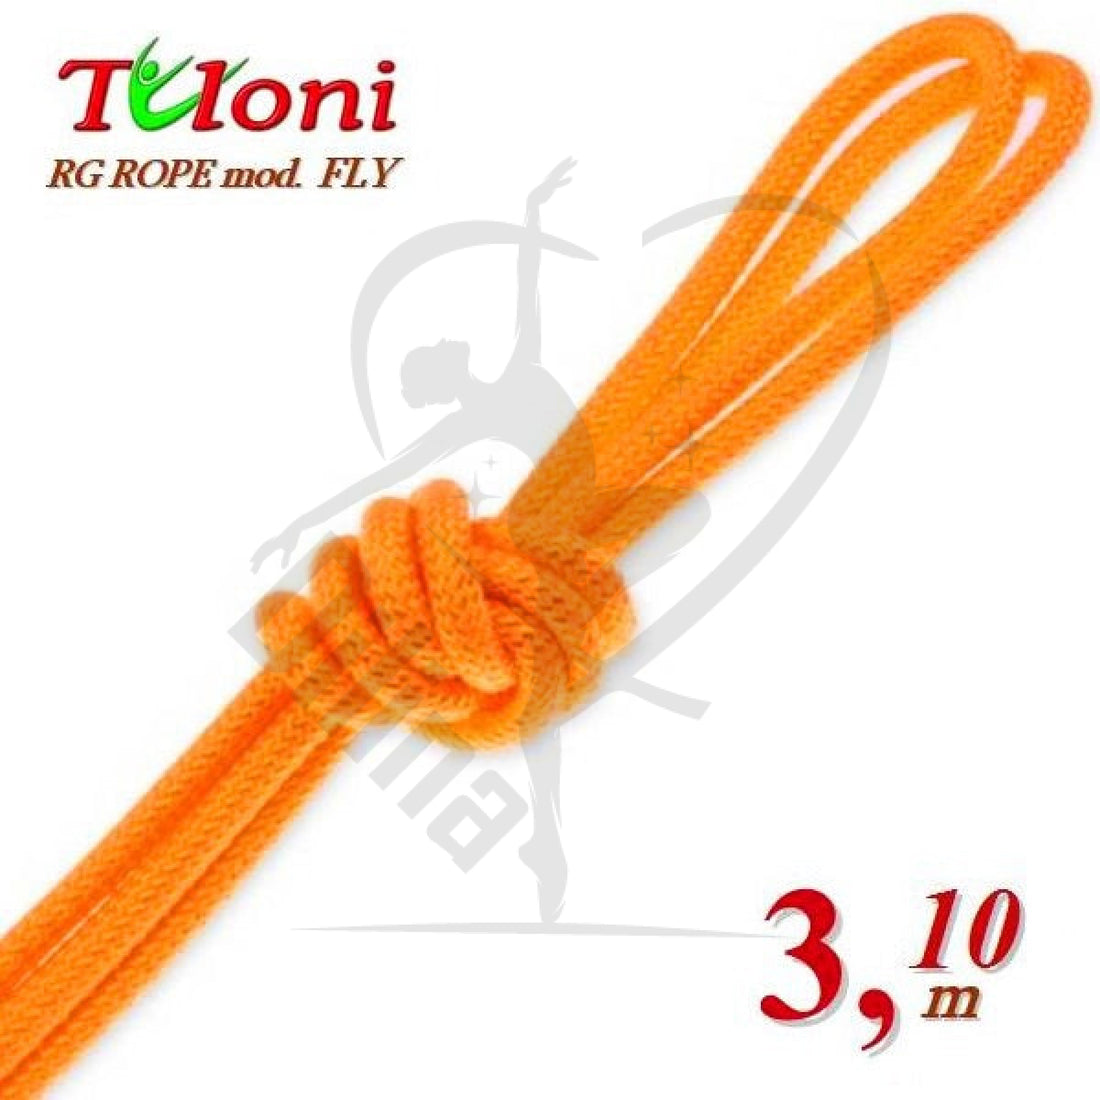 Tuloni Competition Rope For Seniors Mod. Fly 3.1M Orange Ropes